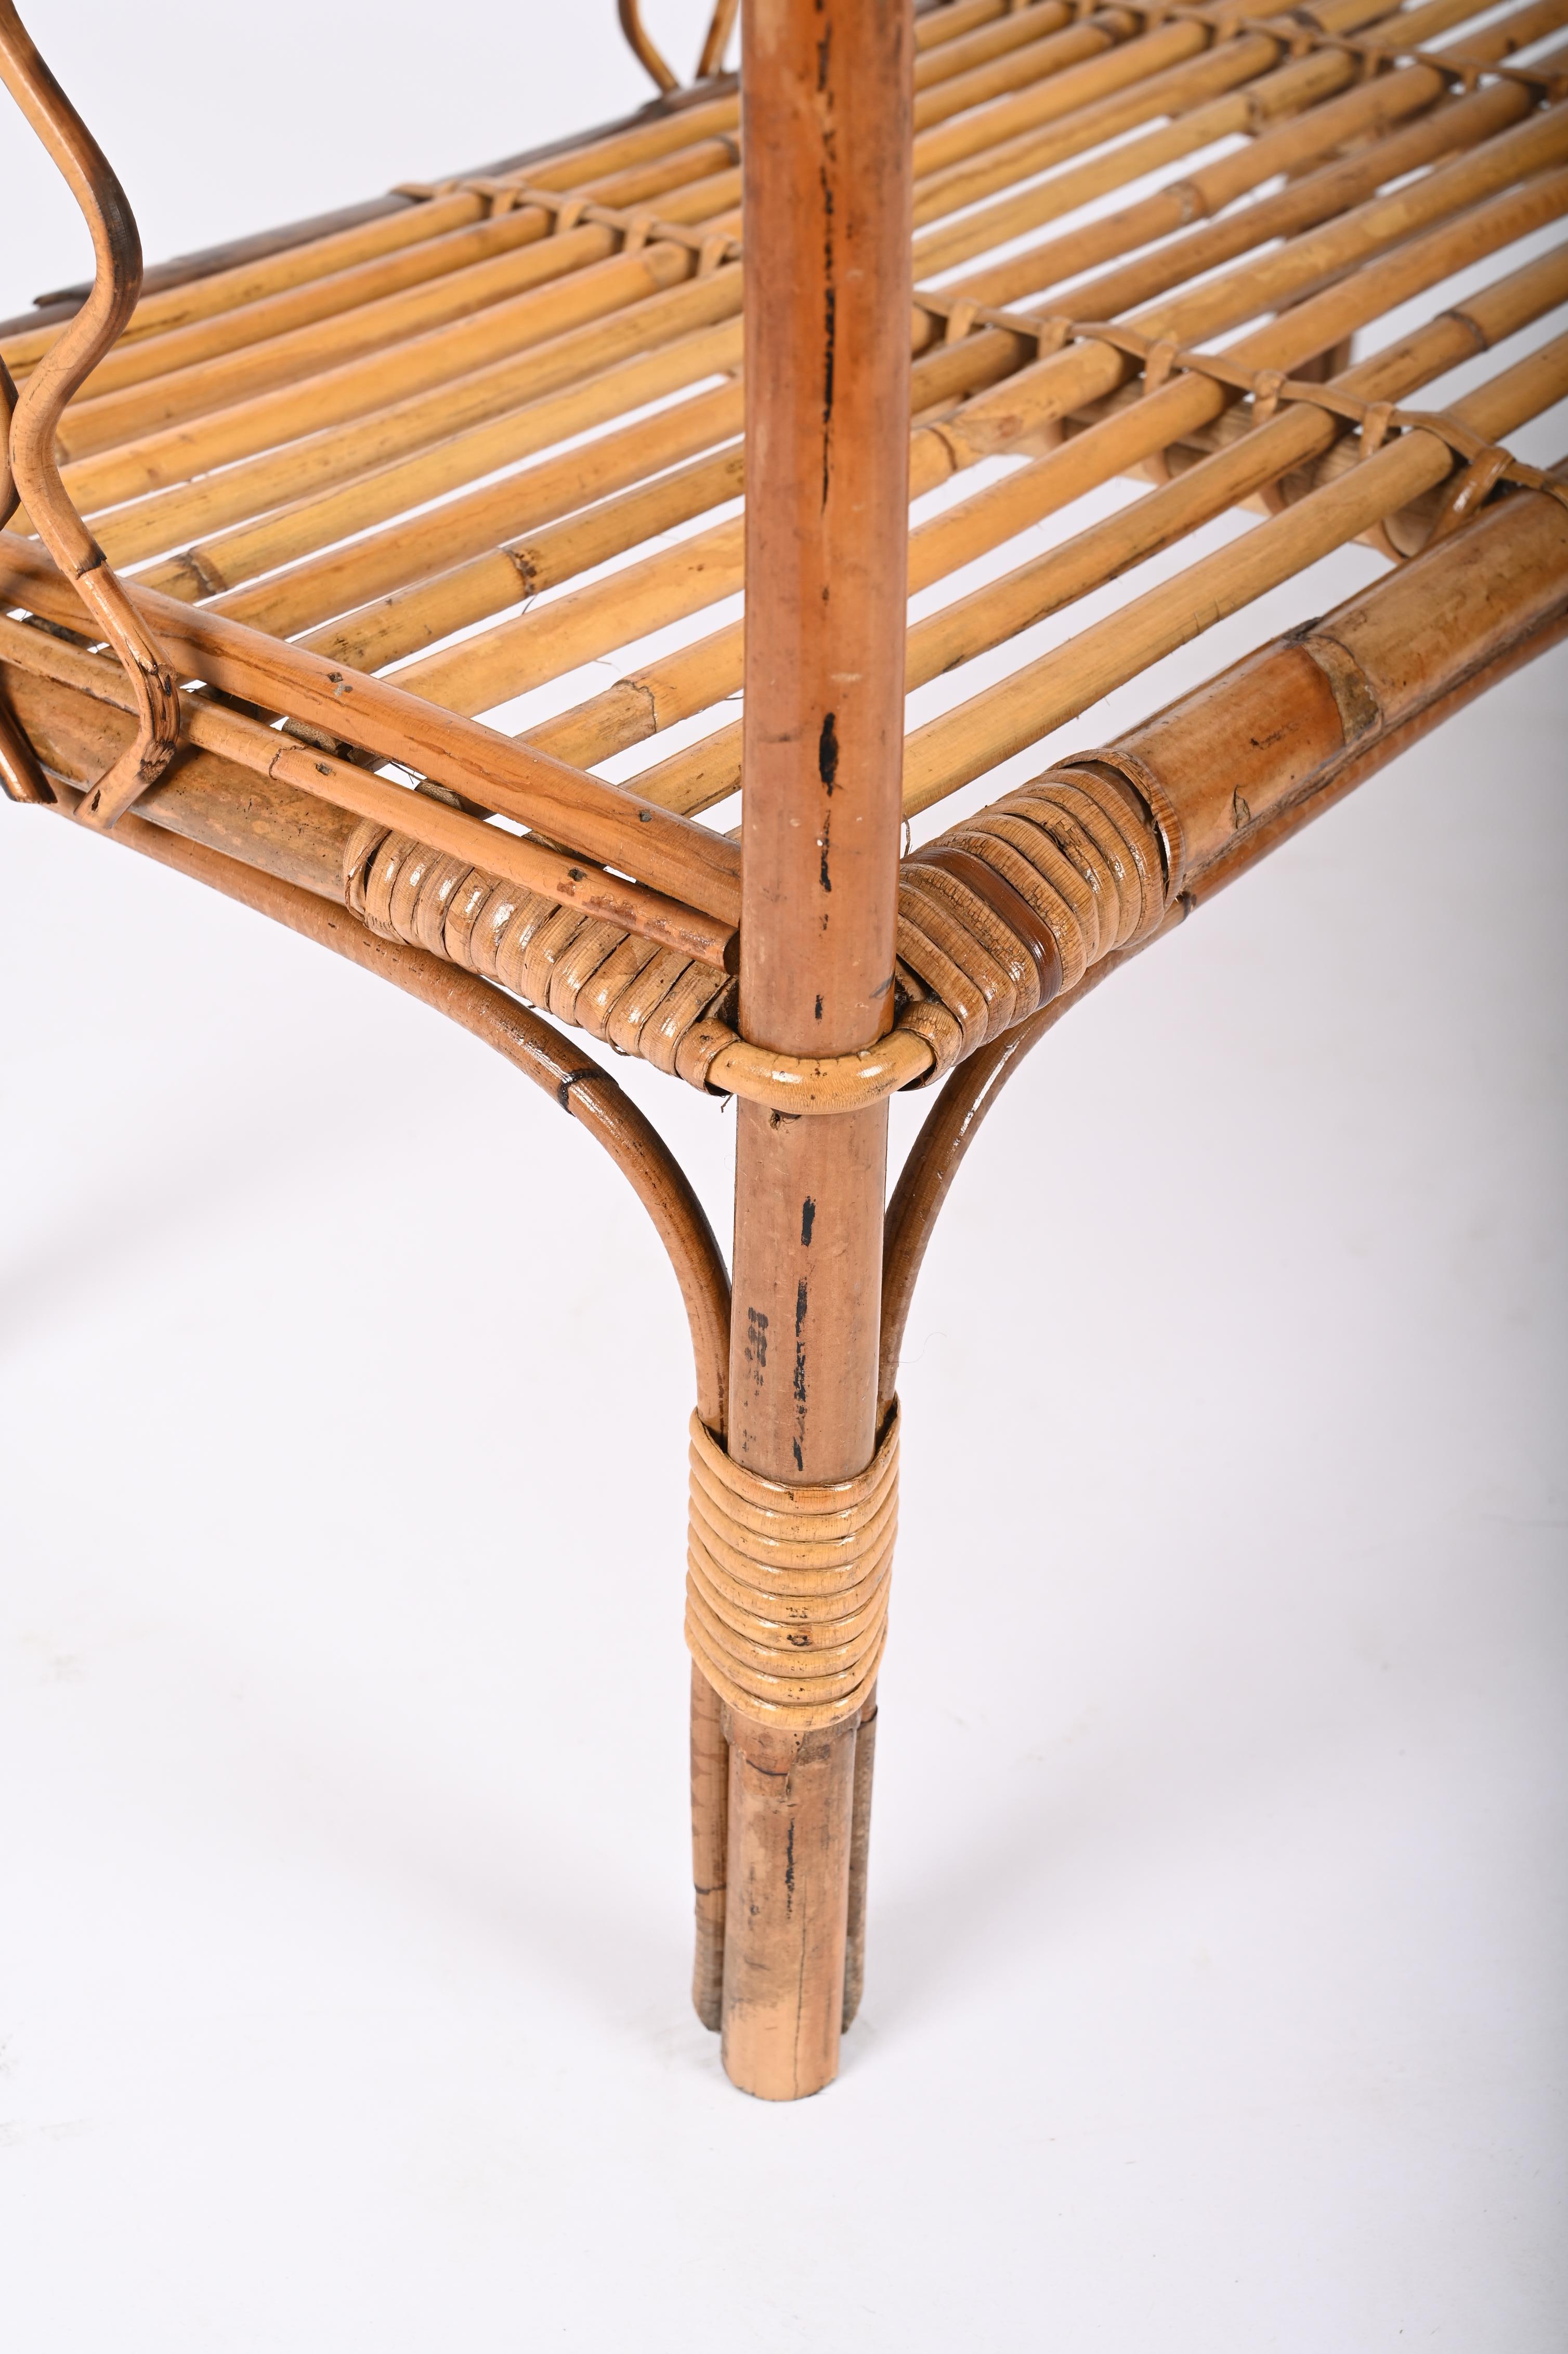 Midcentury Étagère Bamboo and Rattan, Italian Bookcase with Three Shelves, 1970s For Sale 14